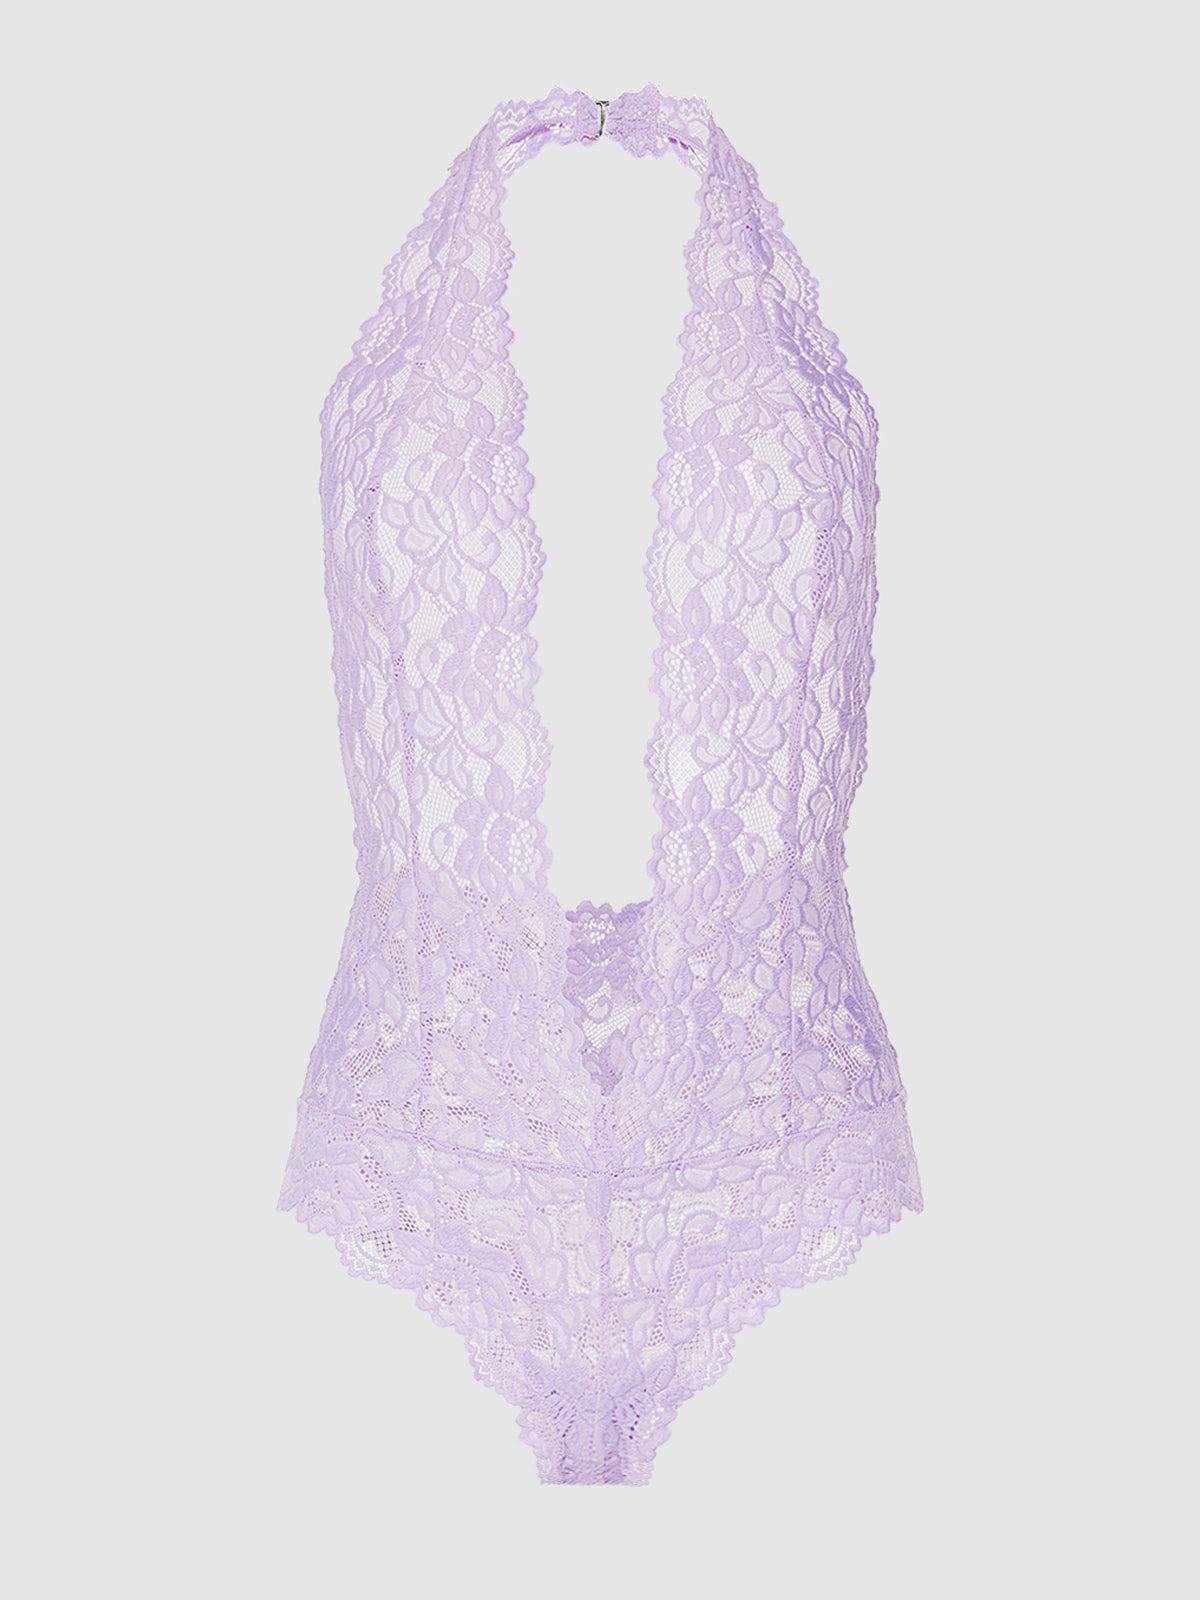 Jessica Lace Teddy Lingerie in Lilac Breeze by FREDERICK'S OF HOLLYWOOD